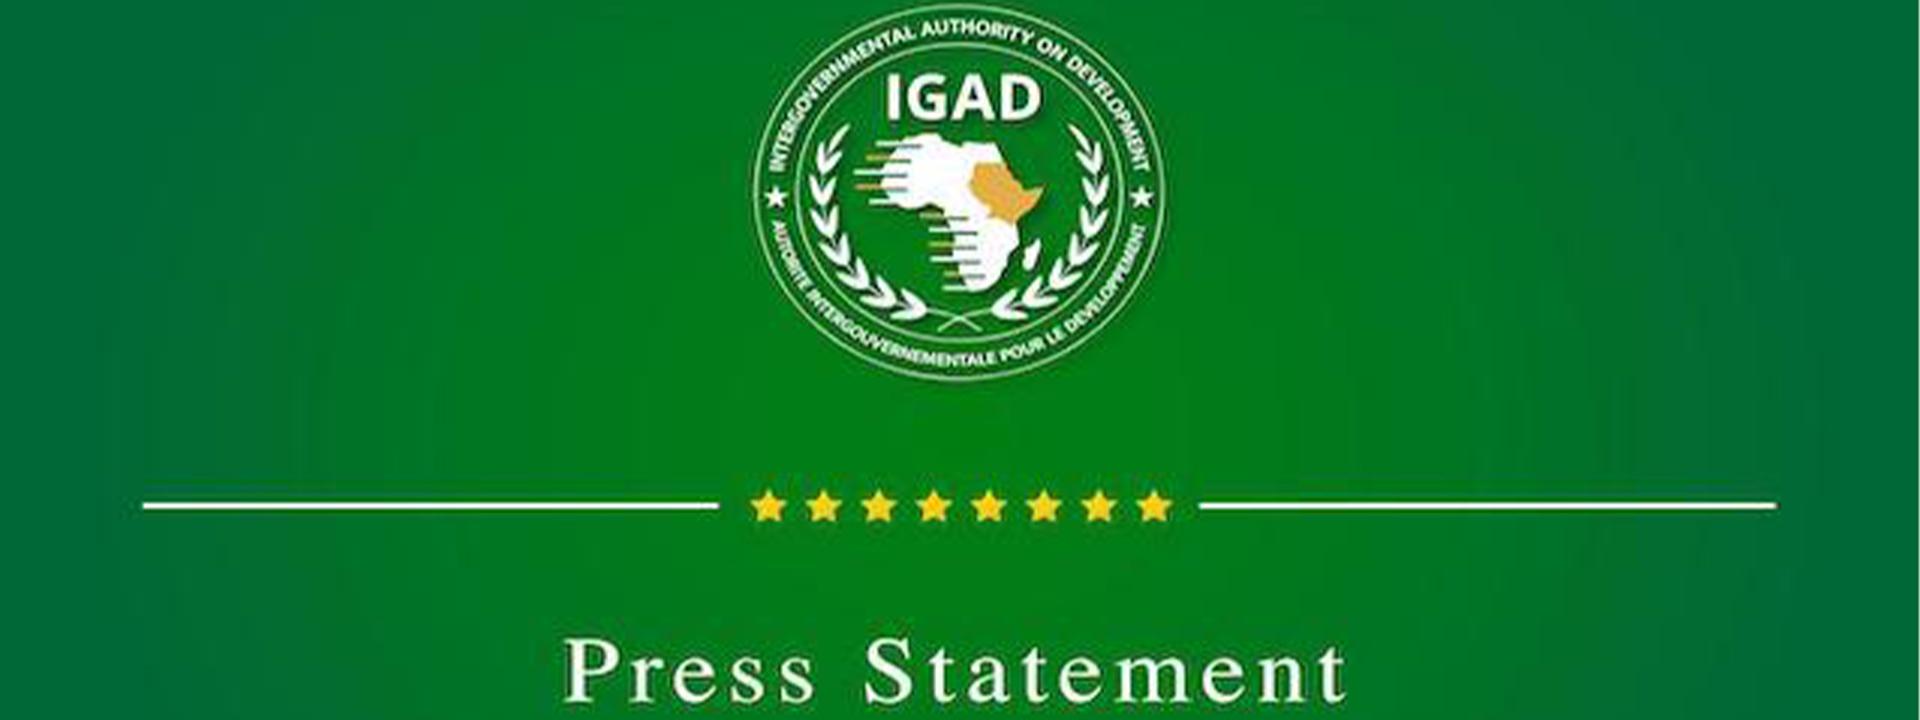 14th Ordinary Session of the IGAD Assembly of Heads of State and Government to Convene in Djibouti on 12 June 2023